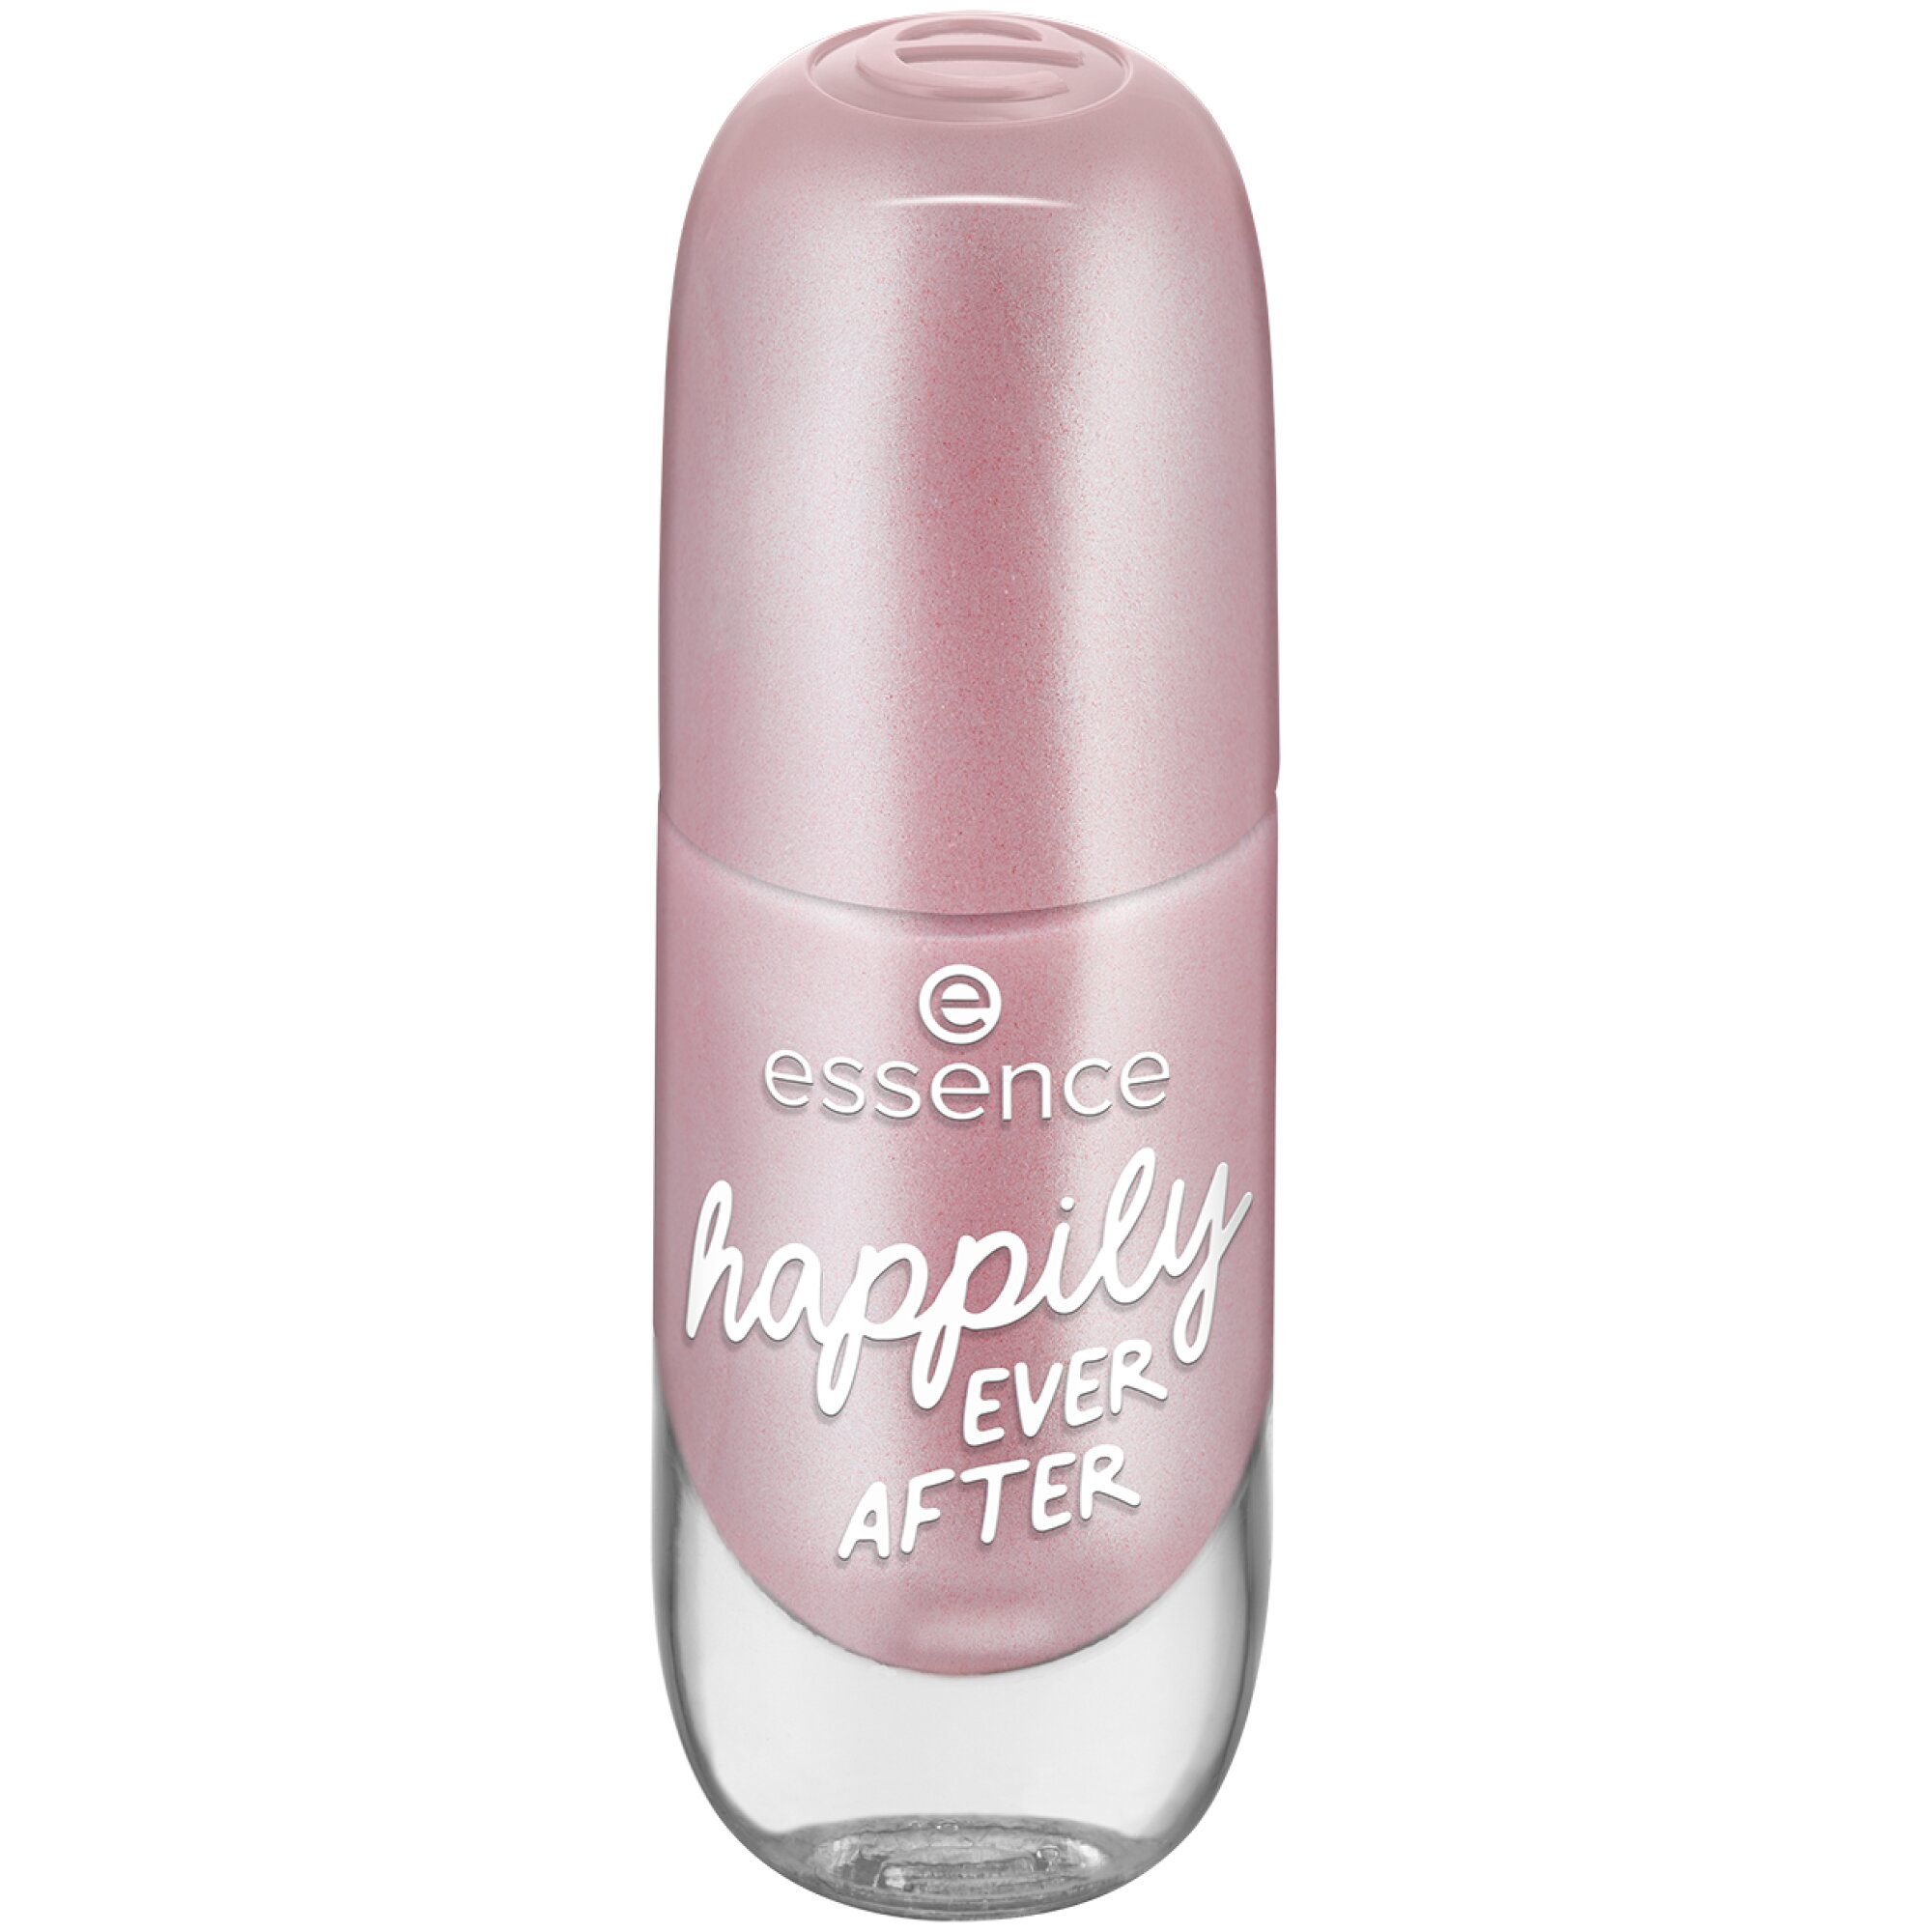 Lac pentru unghii Gel Nail Color, 06 - Happily Ever After, 8ml, Essence